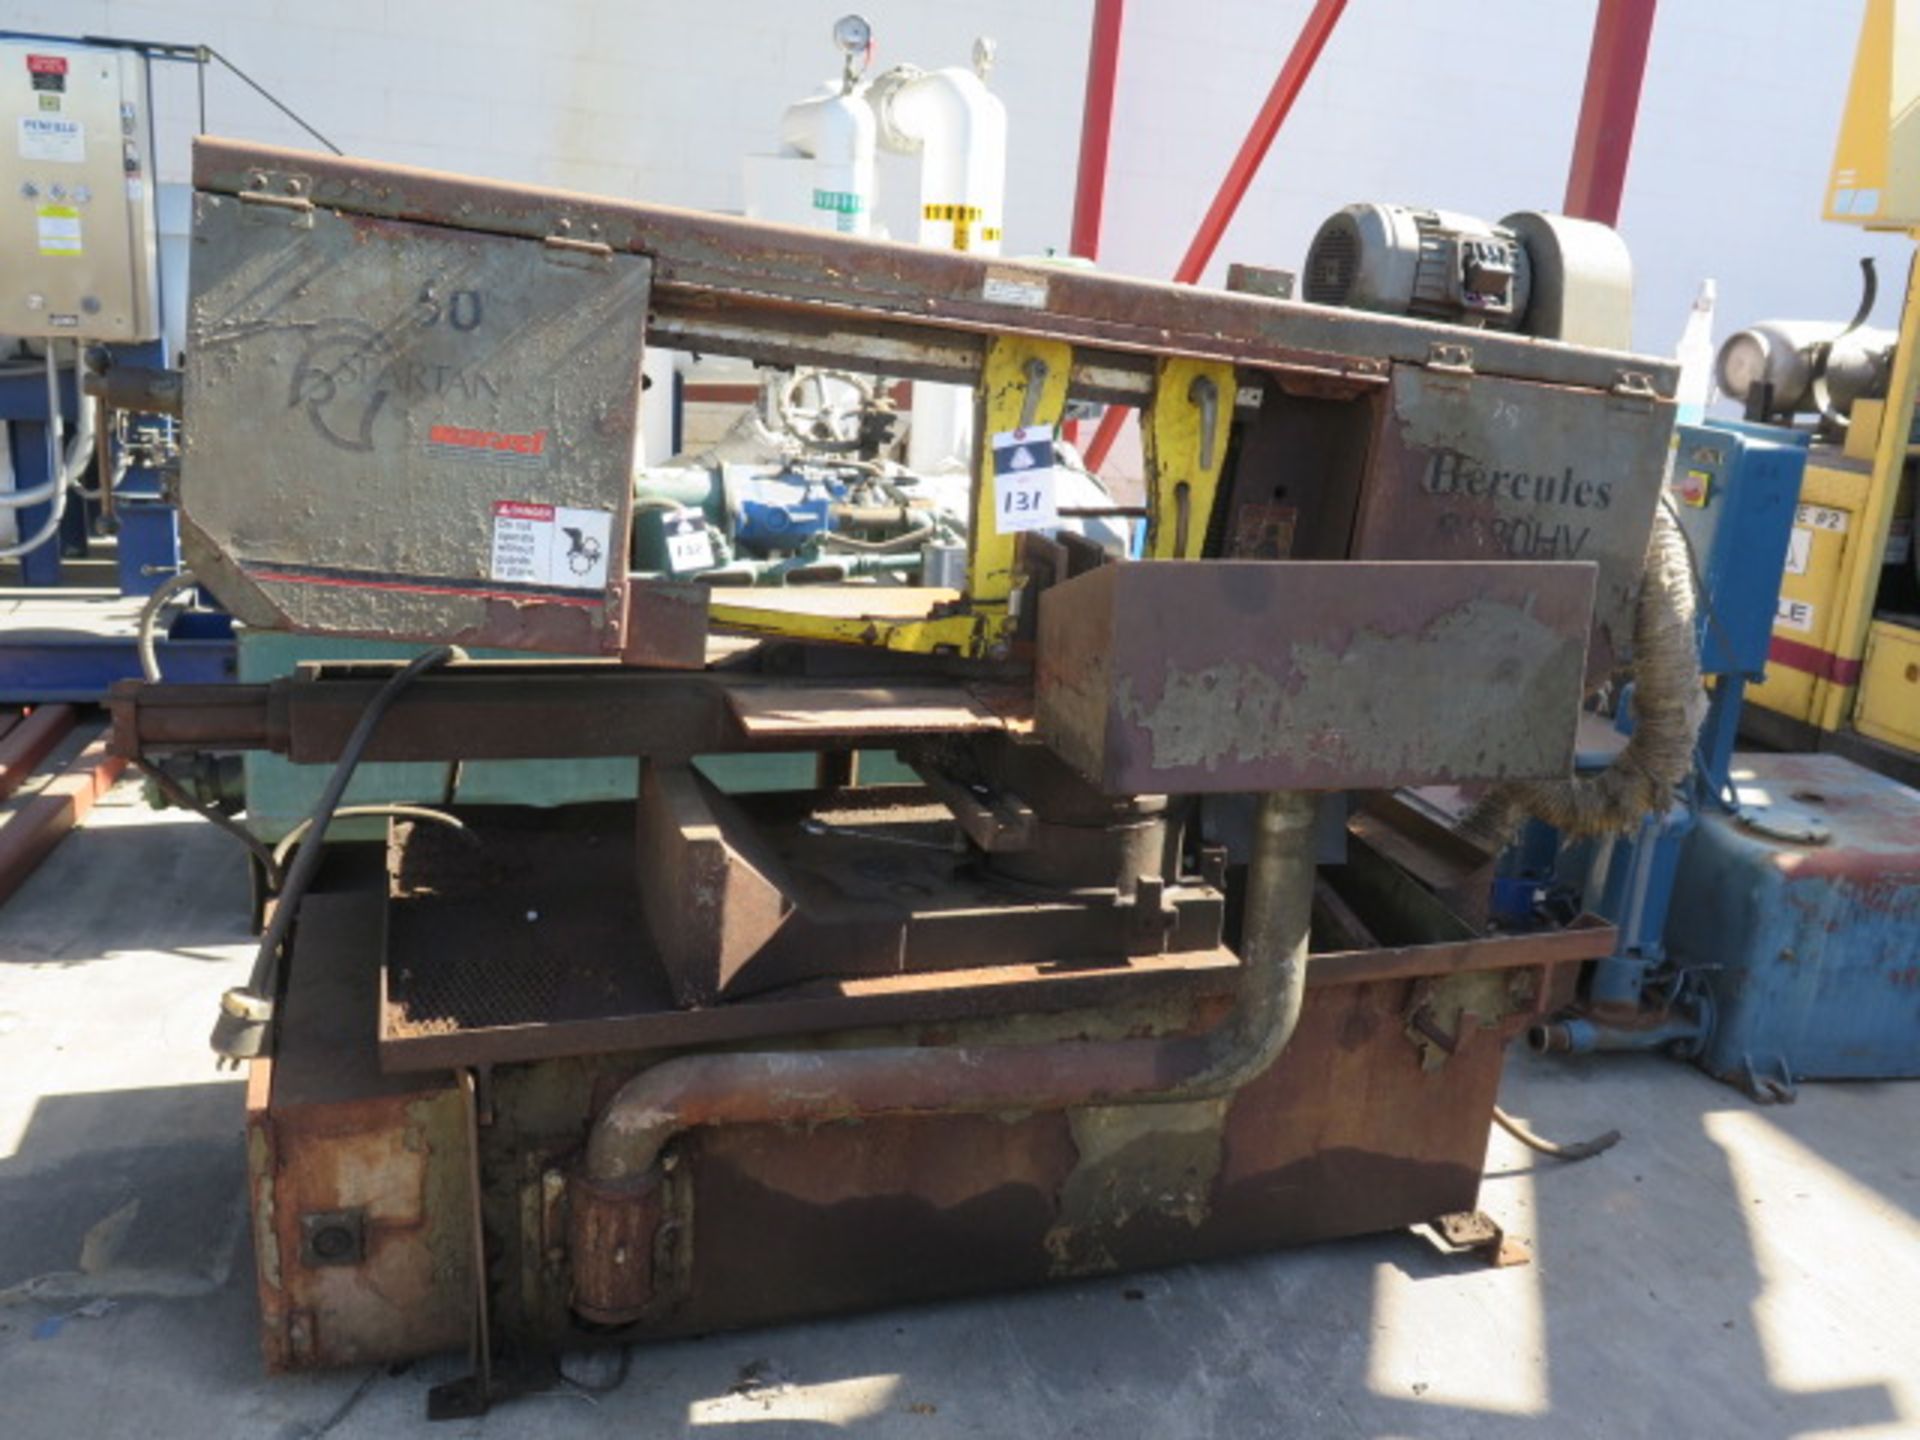 Spartan Marvel Hercules S330HV Horizontal Miter Band Saw s/n S330HV-122 w/Marvel Controls,SOLD AS IS